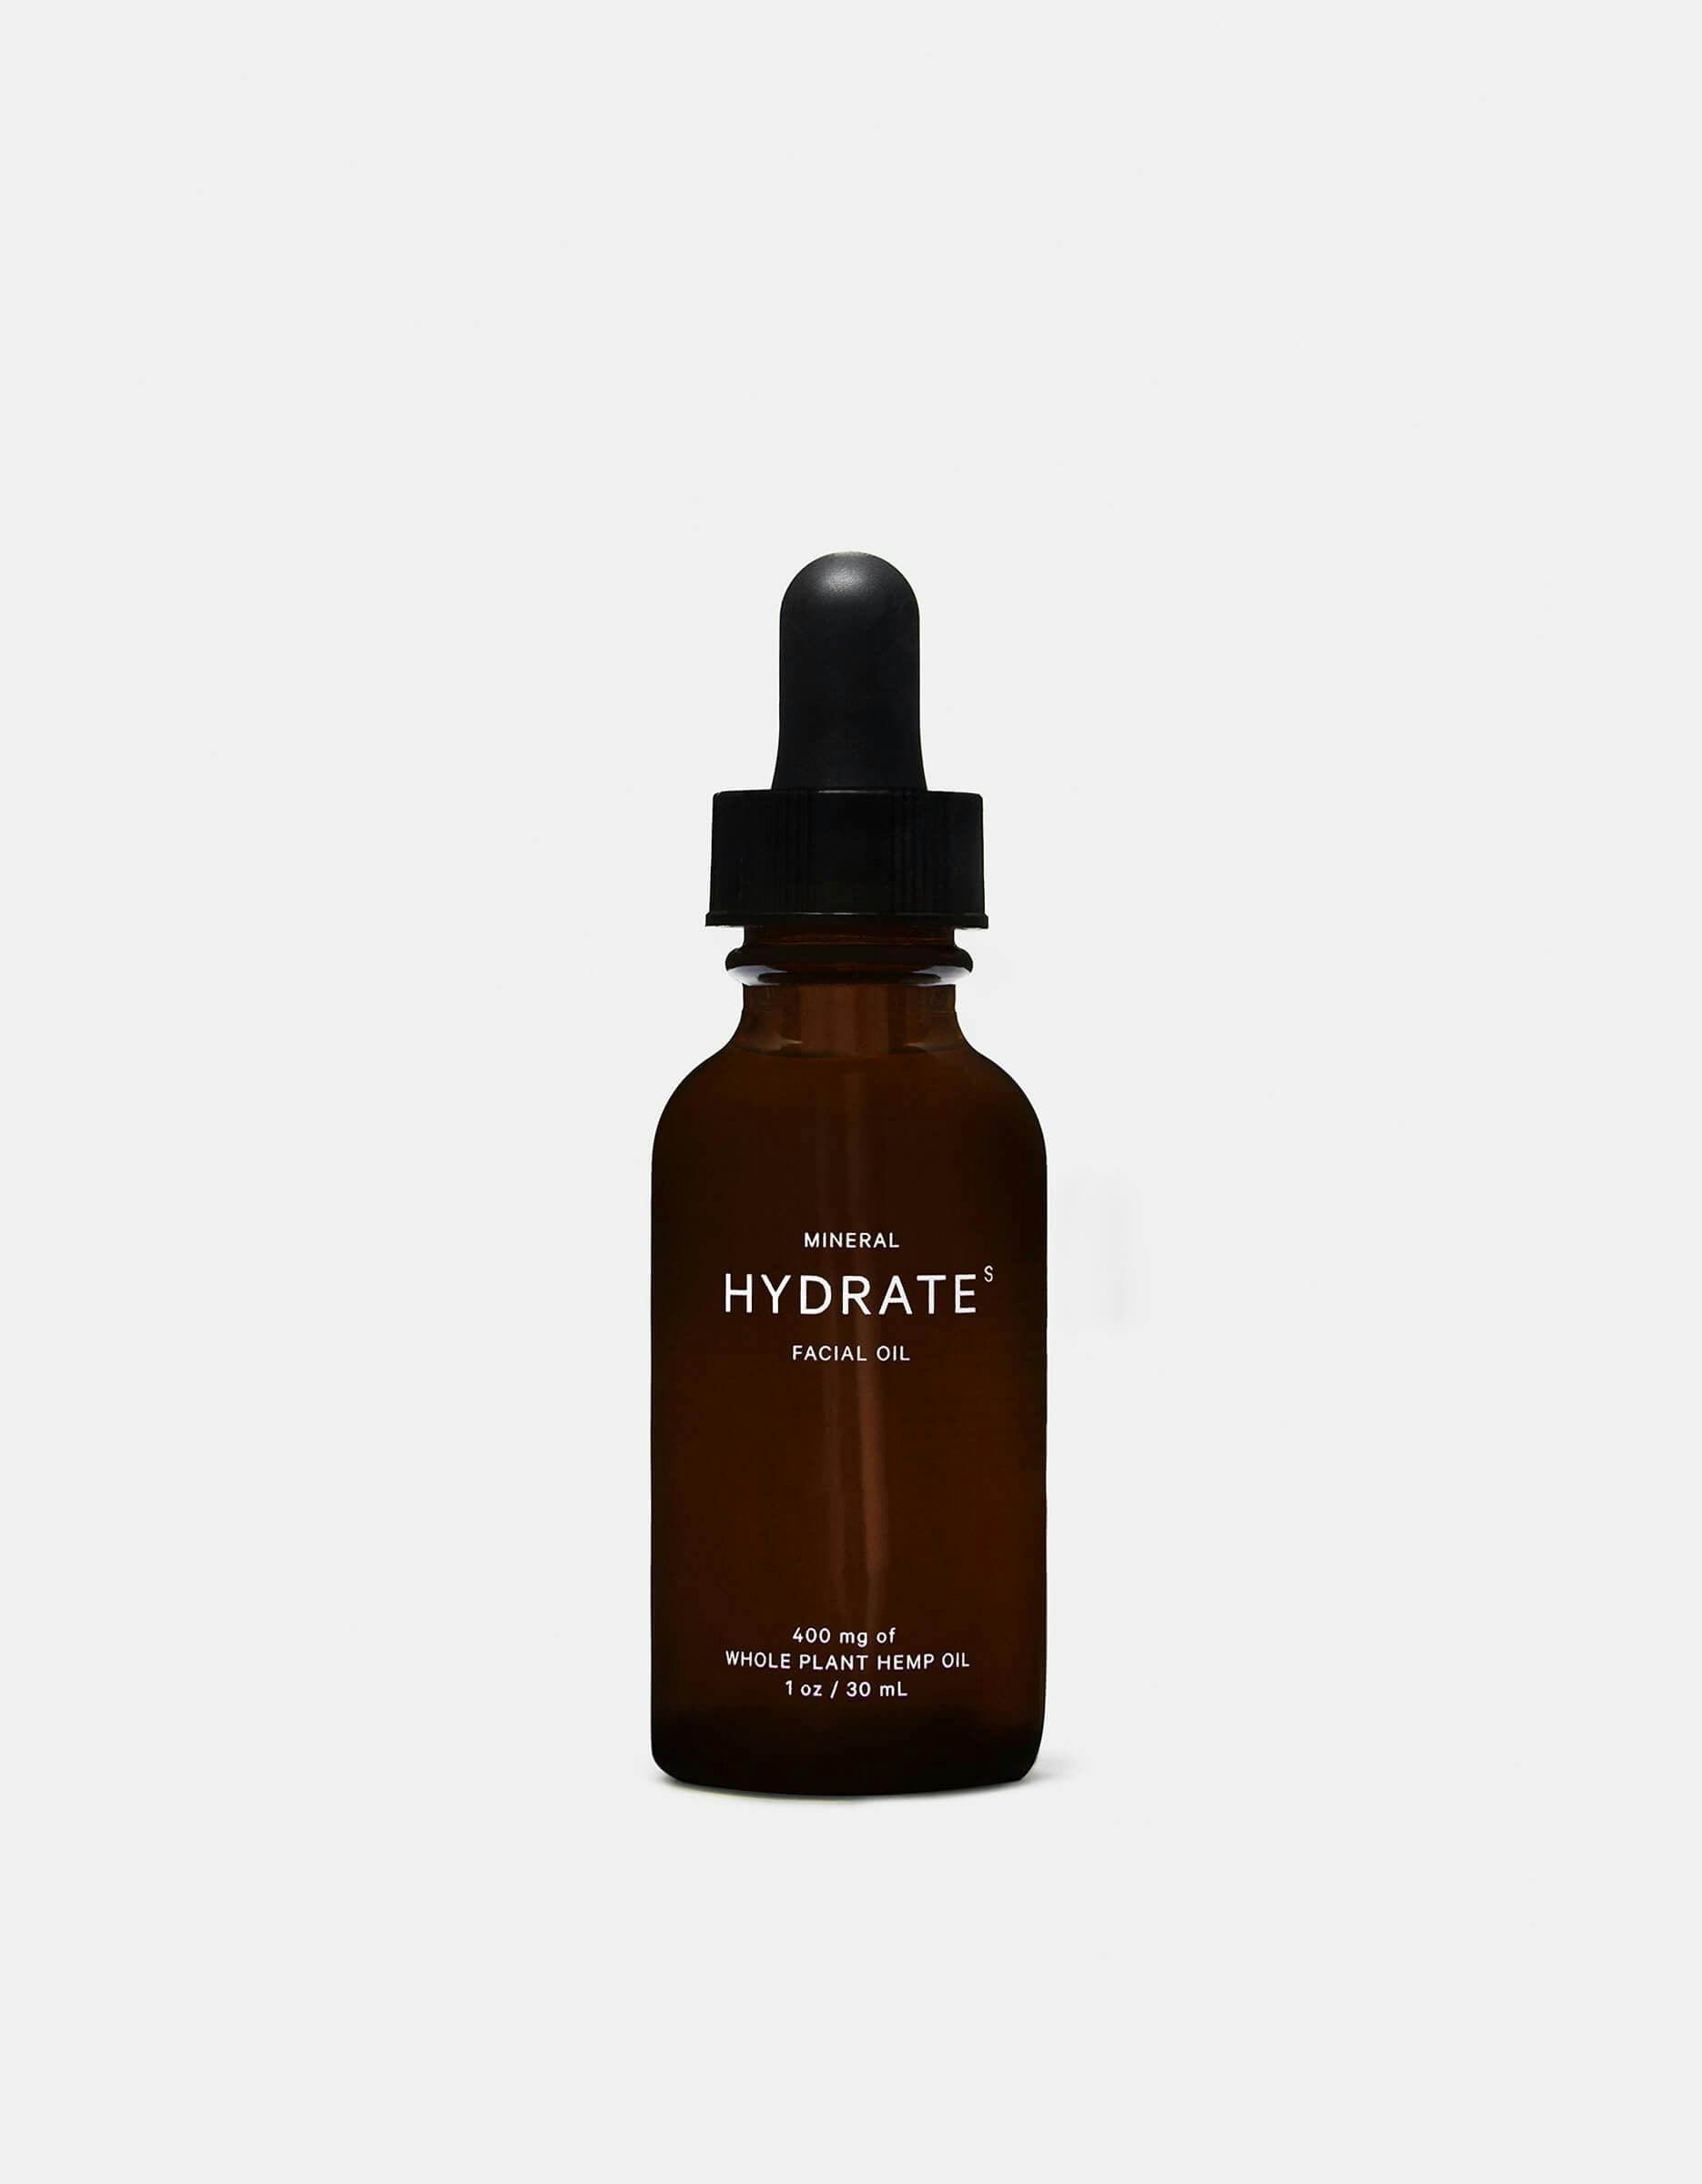 MINERAL HYDRATE 2021